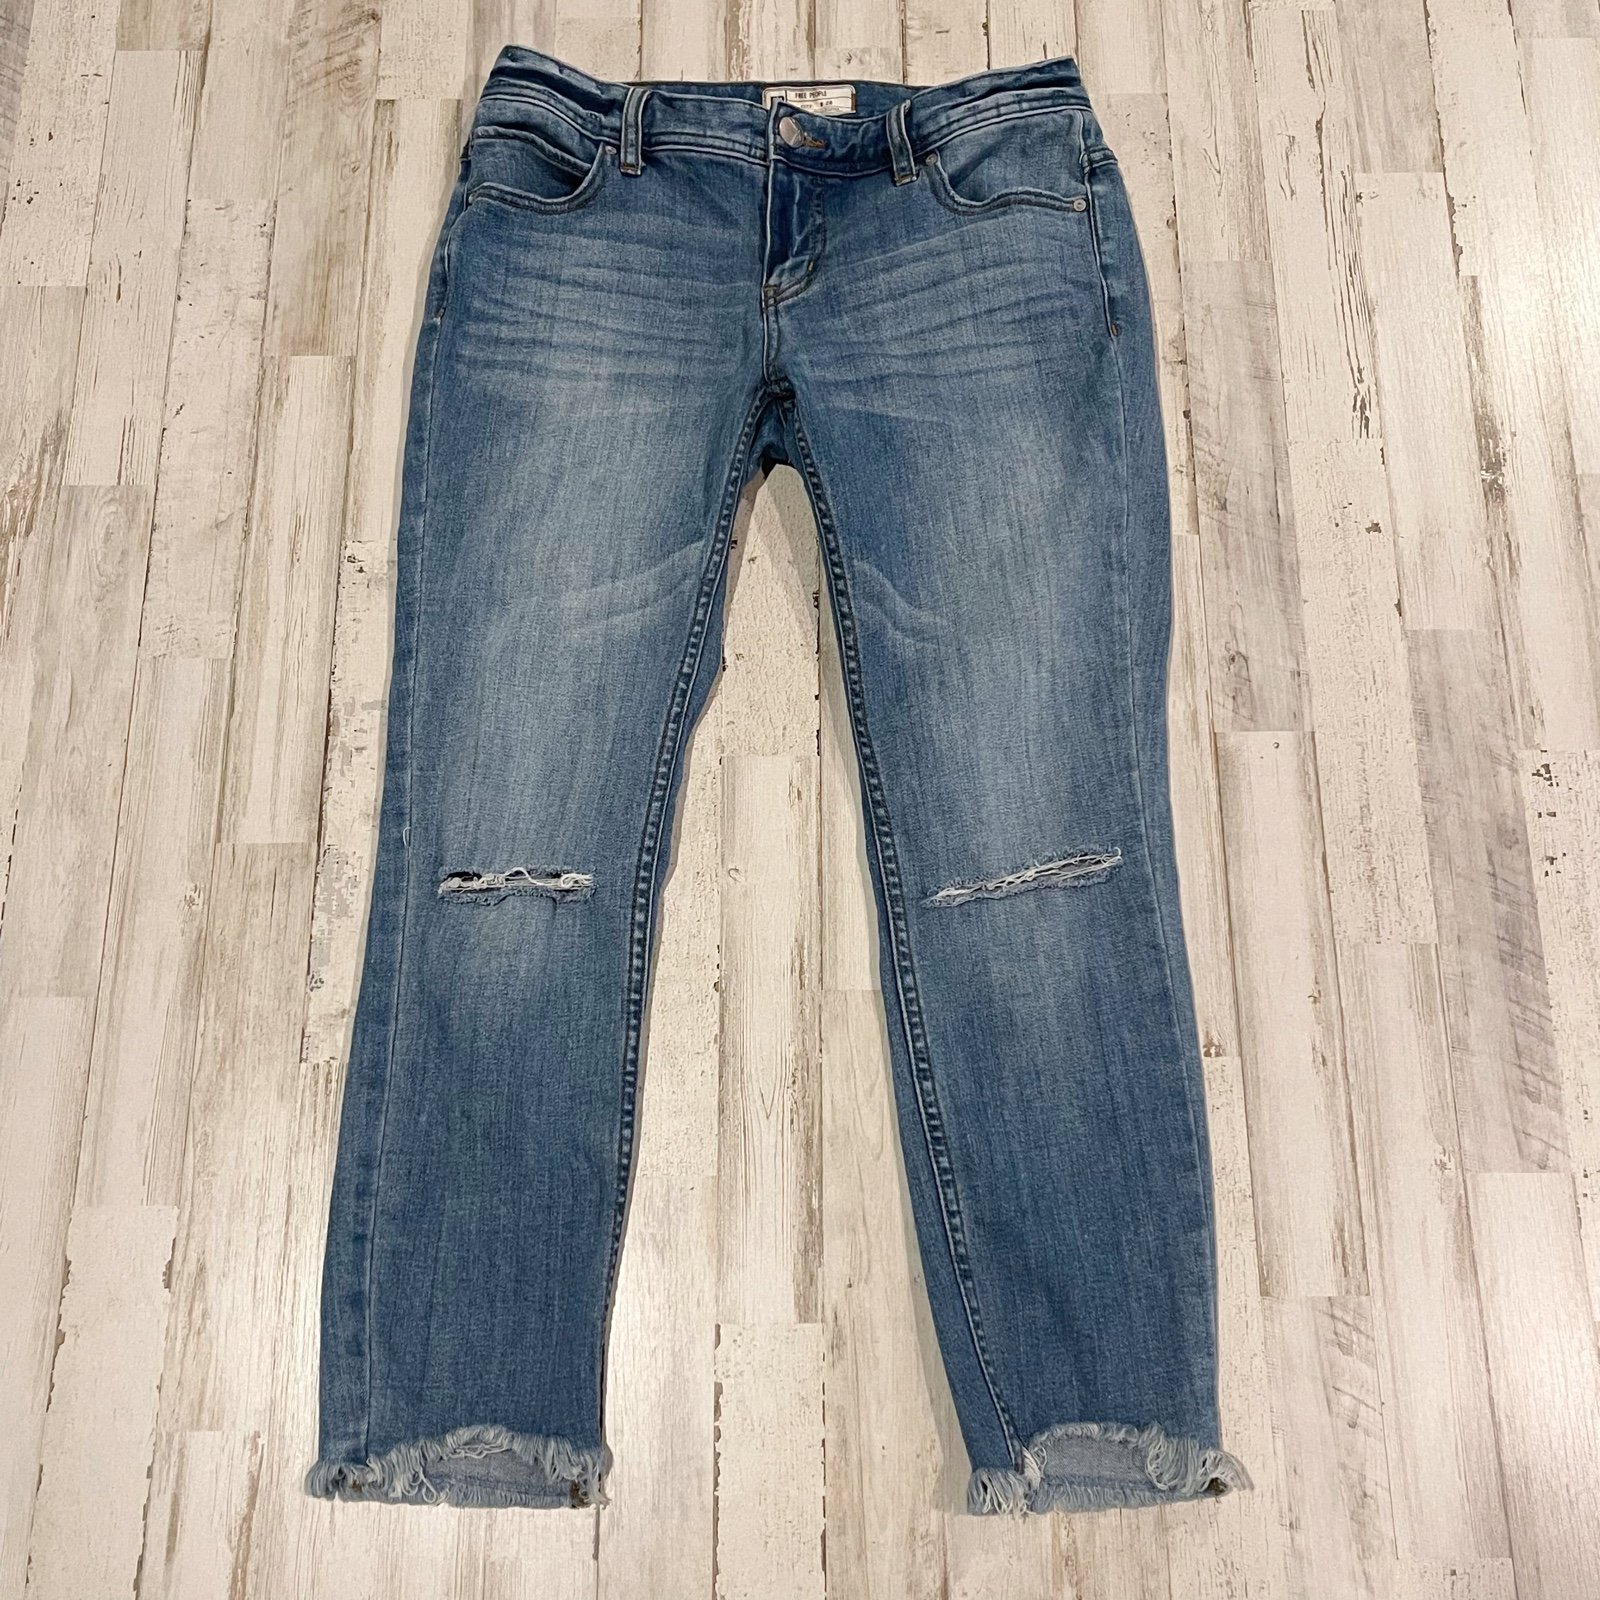 Fashion Free People High Rise Stretch Skinny Jeans Sz 28 PnKs1HVV4 US Outlet